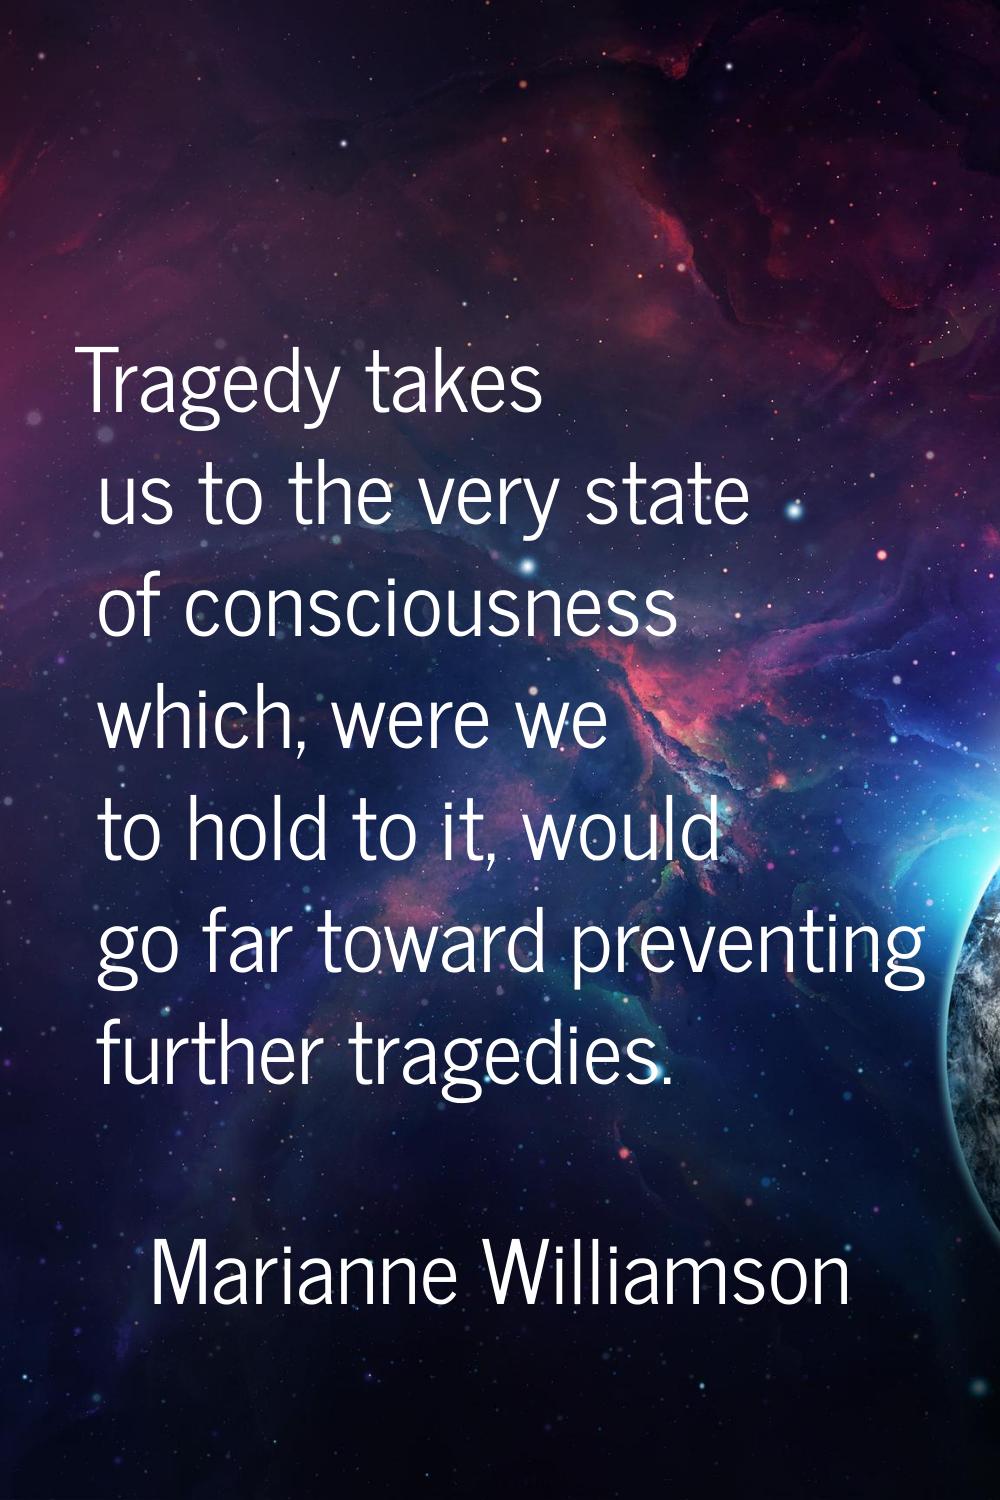 Tragedy takes us to the very state of consciousness which, were we to hold to it, would go far towa